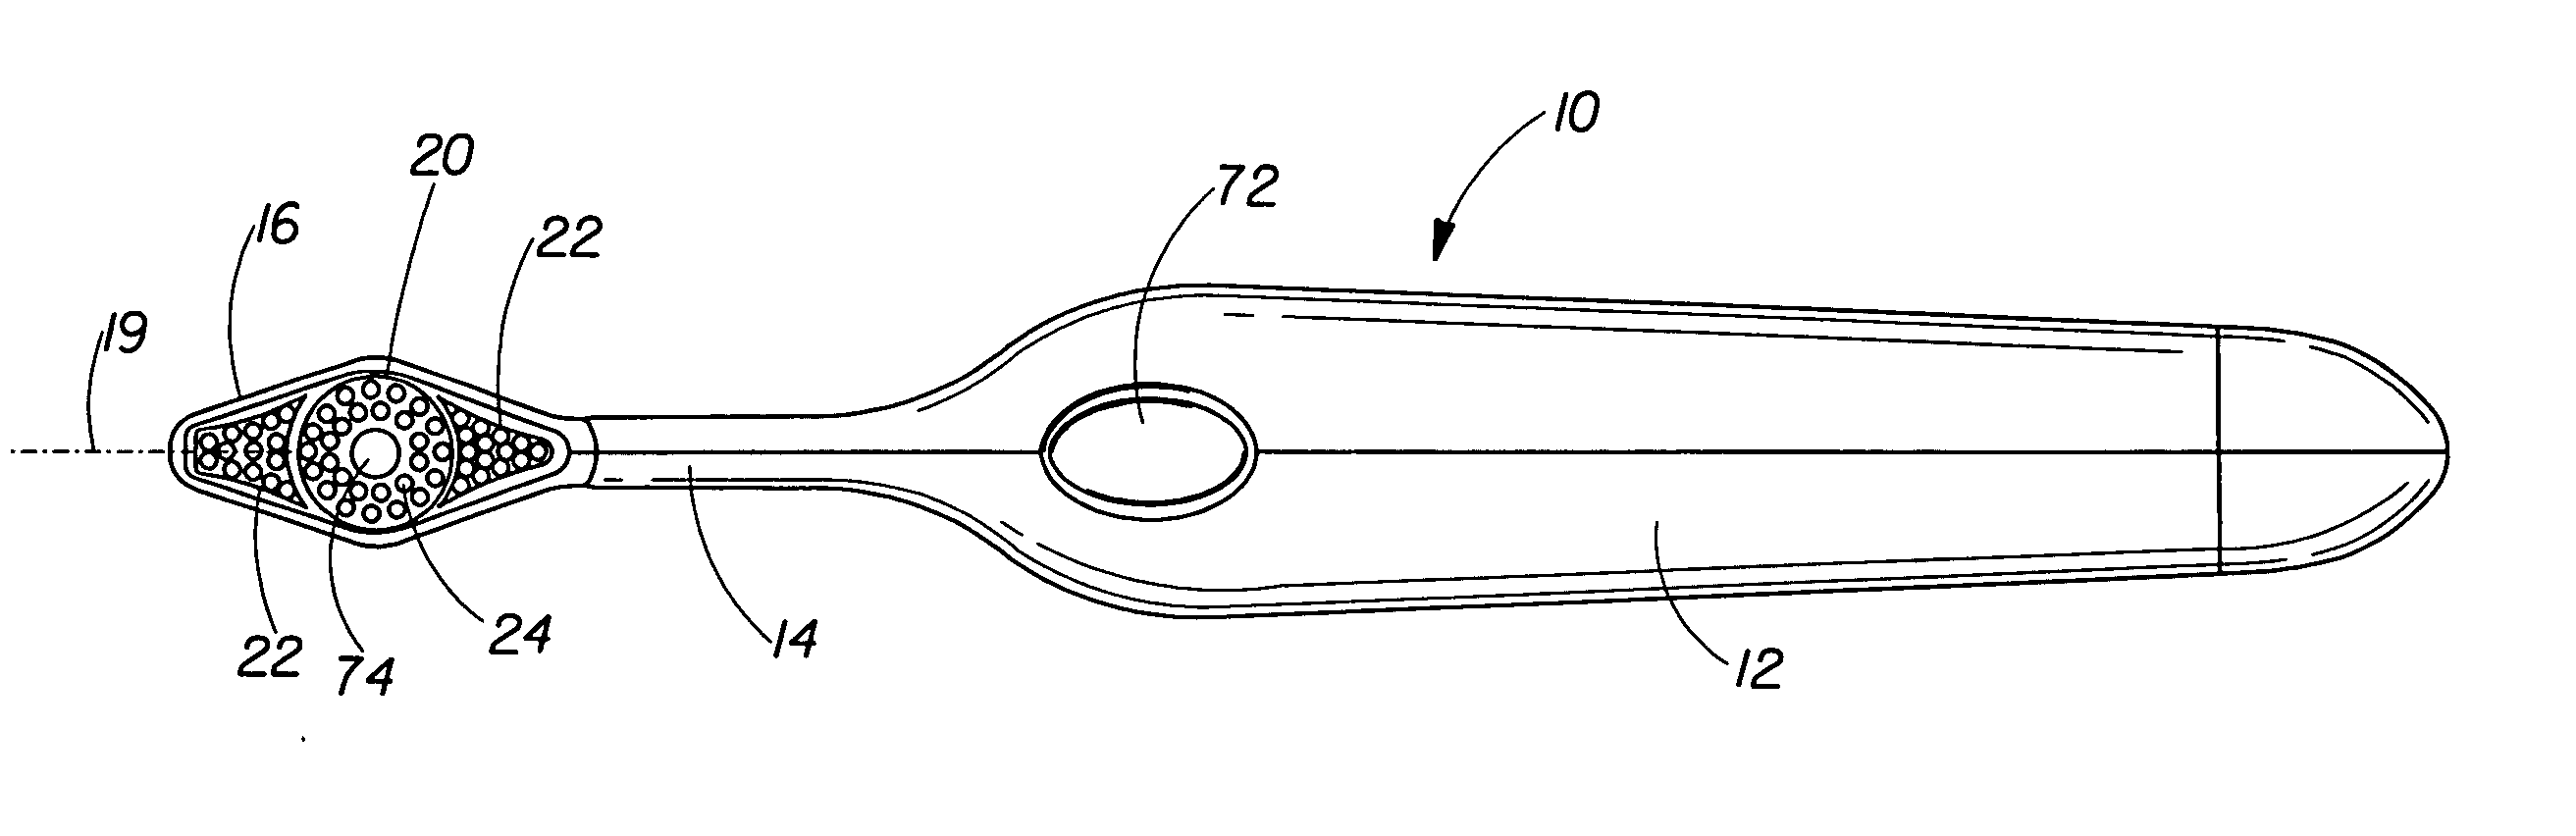 Illuminated electric toothbrushes and methods of use